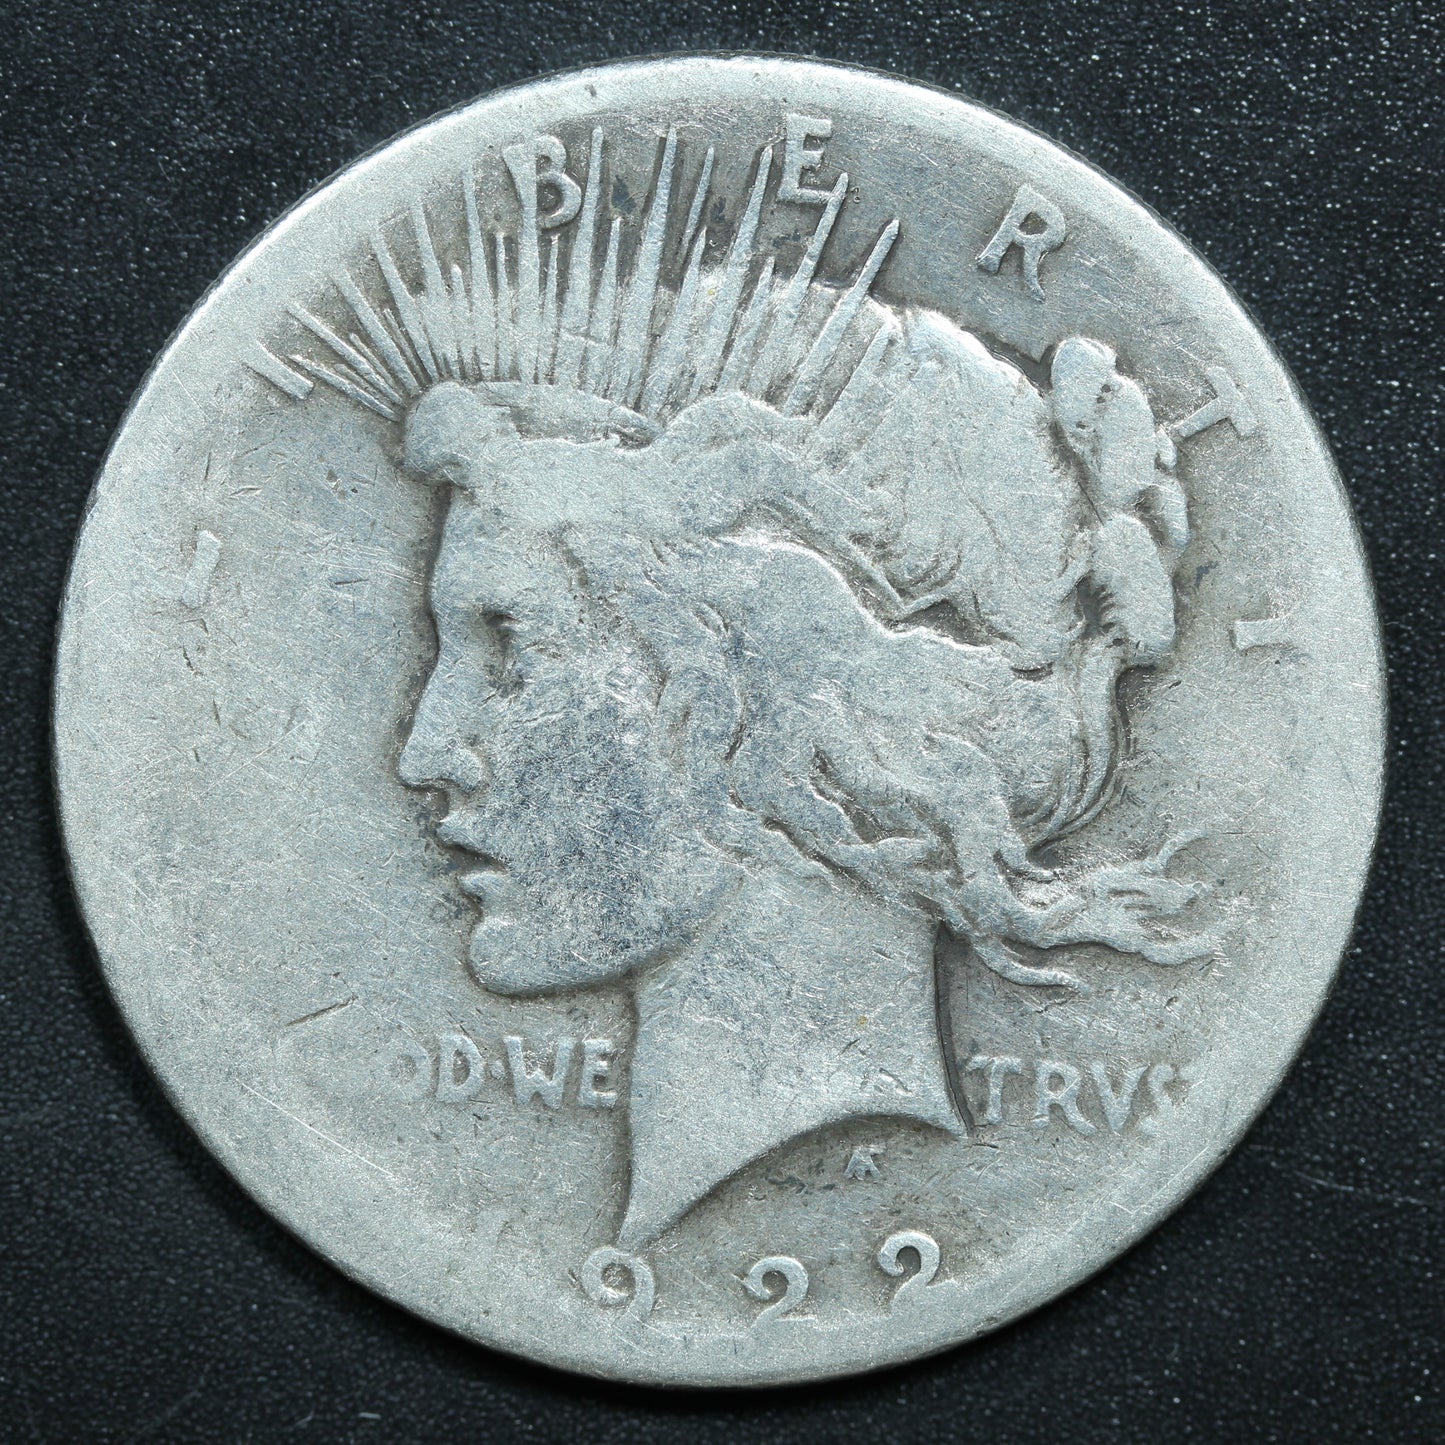 1922 S Peace Dollar - Silver - San Francisco - Exact Coin Pictured